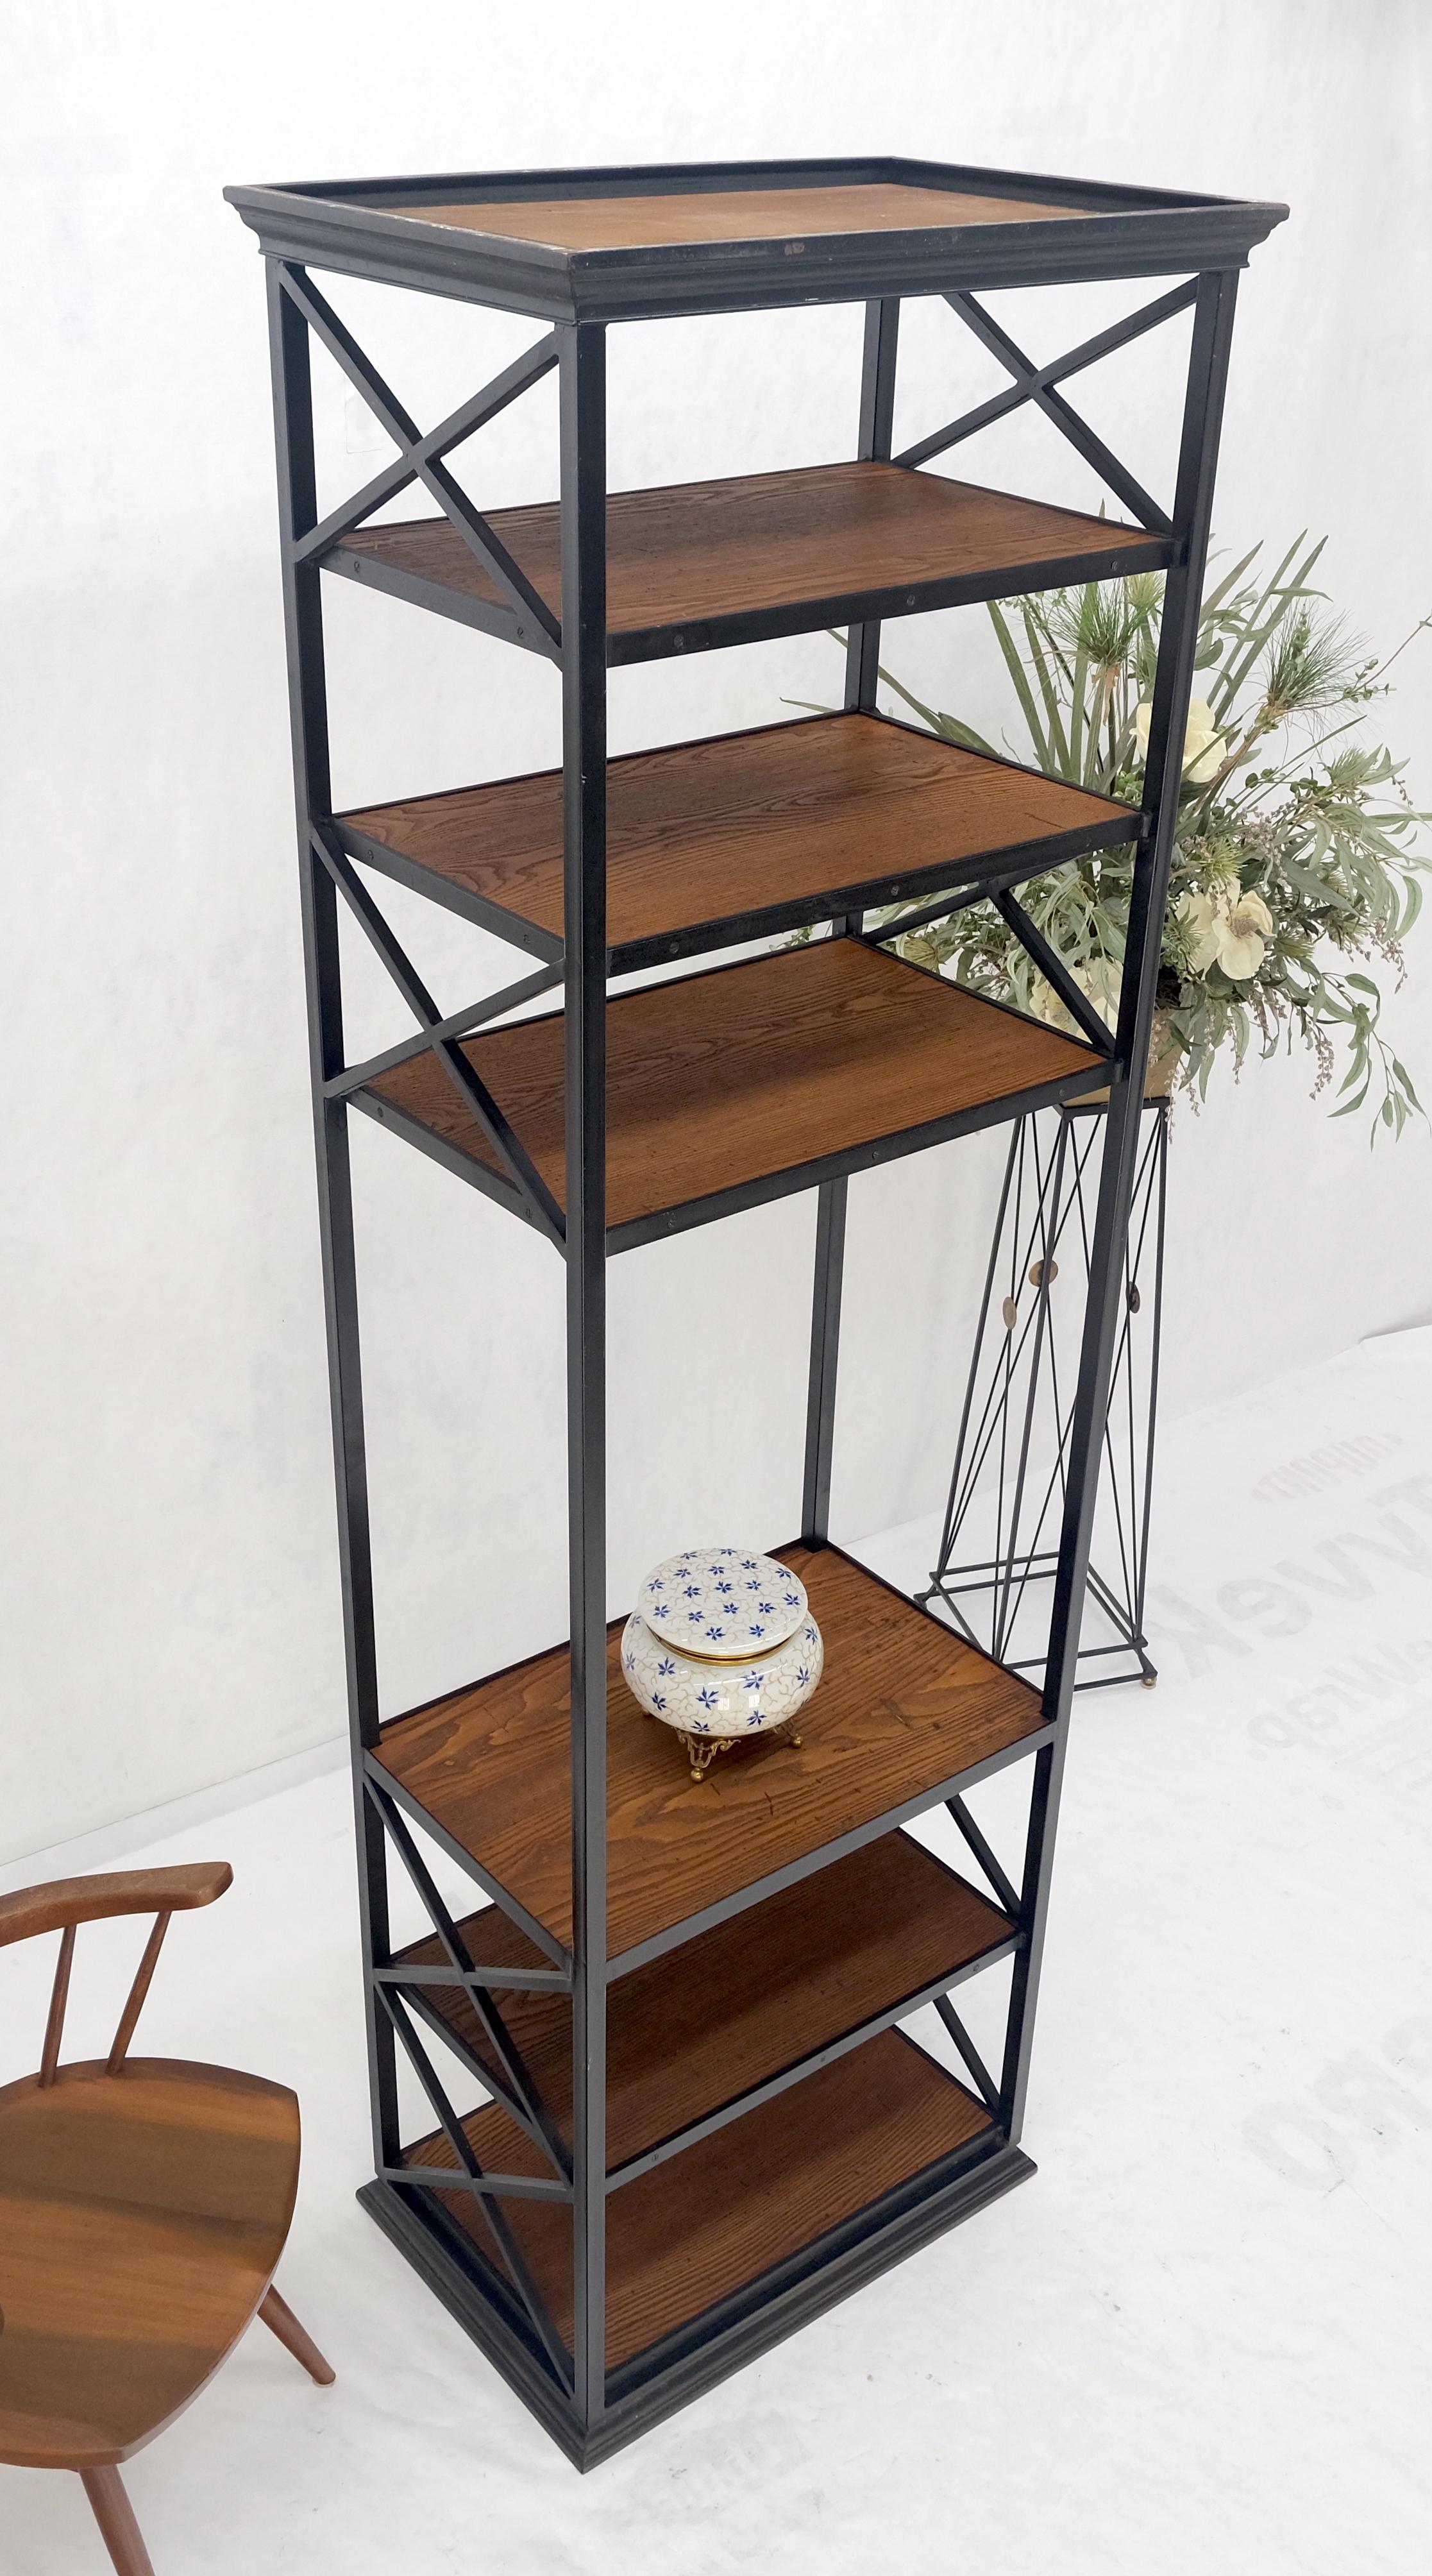 Iron Black Steel & Wormy Chestnut Shelves 8 Foot Tall Etagere BookCase Display MINT For Sale